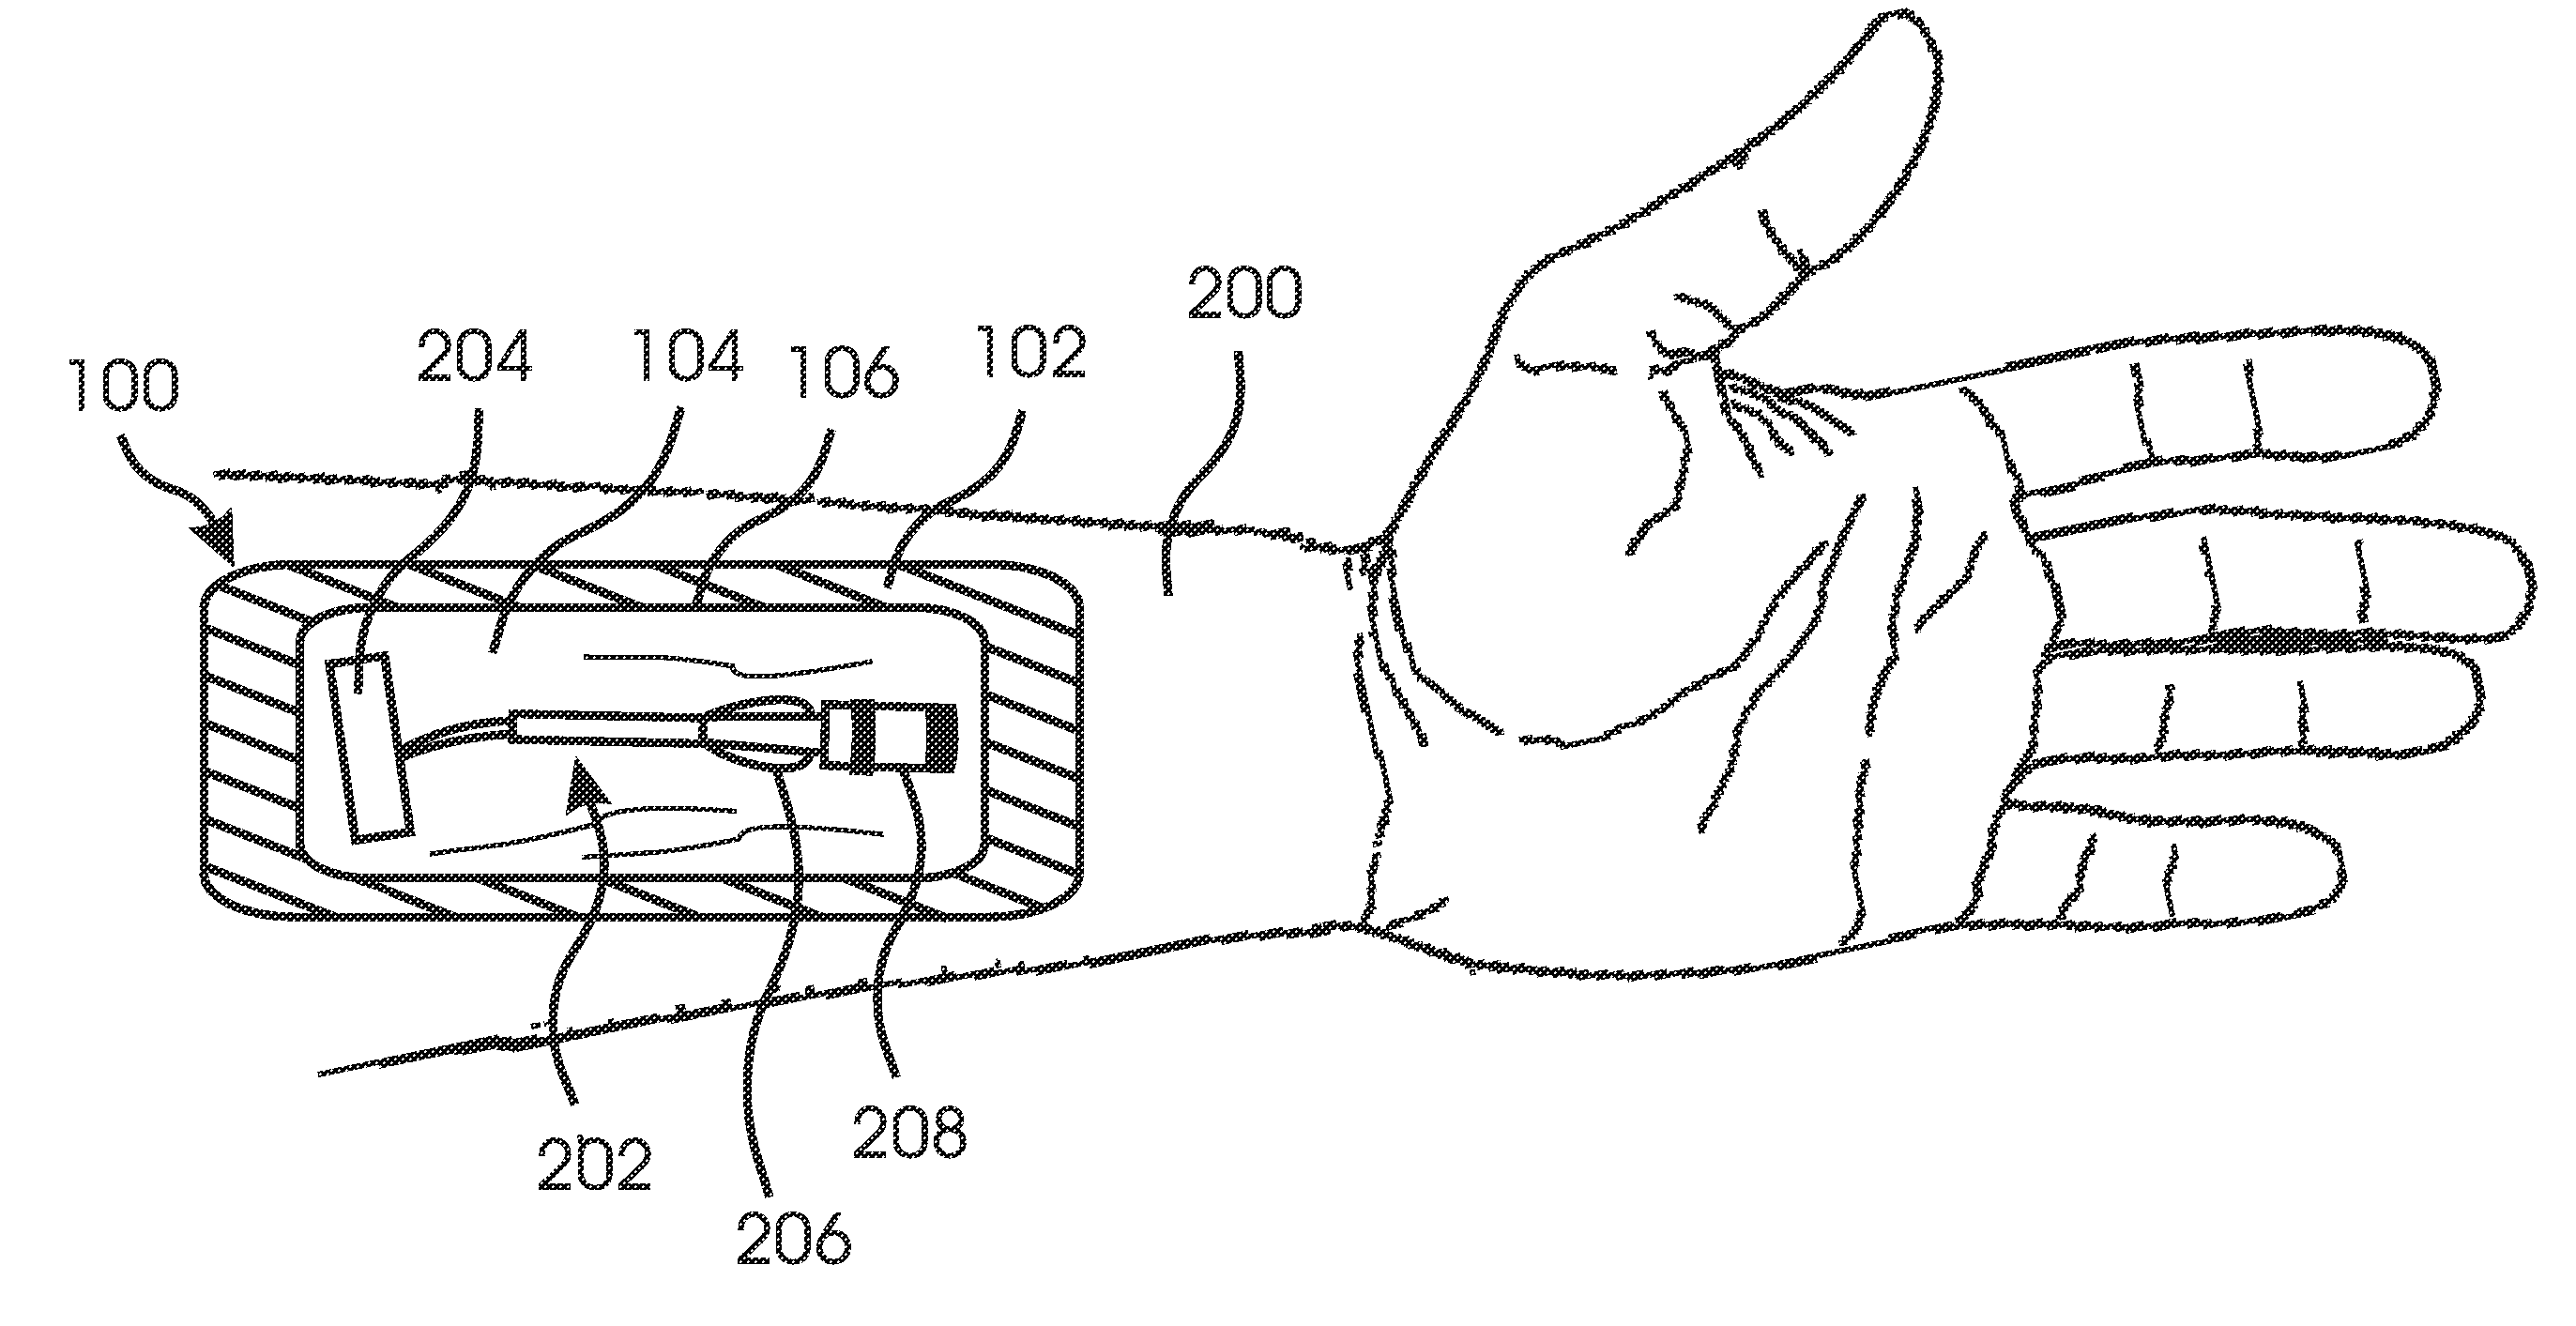 Water Repellant Cover for Venous Access Devices